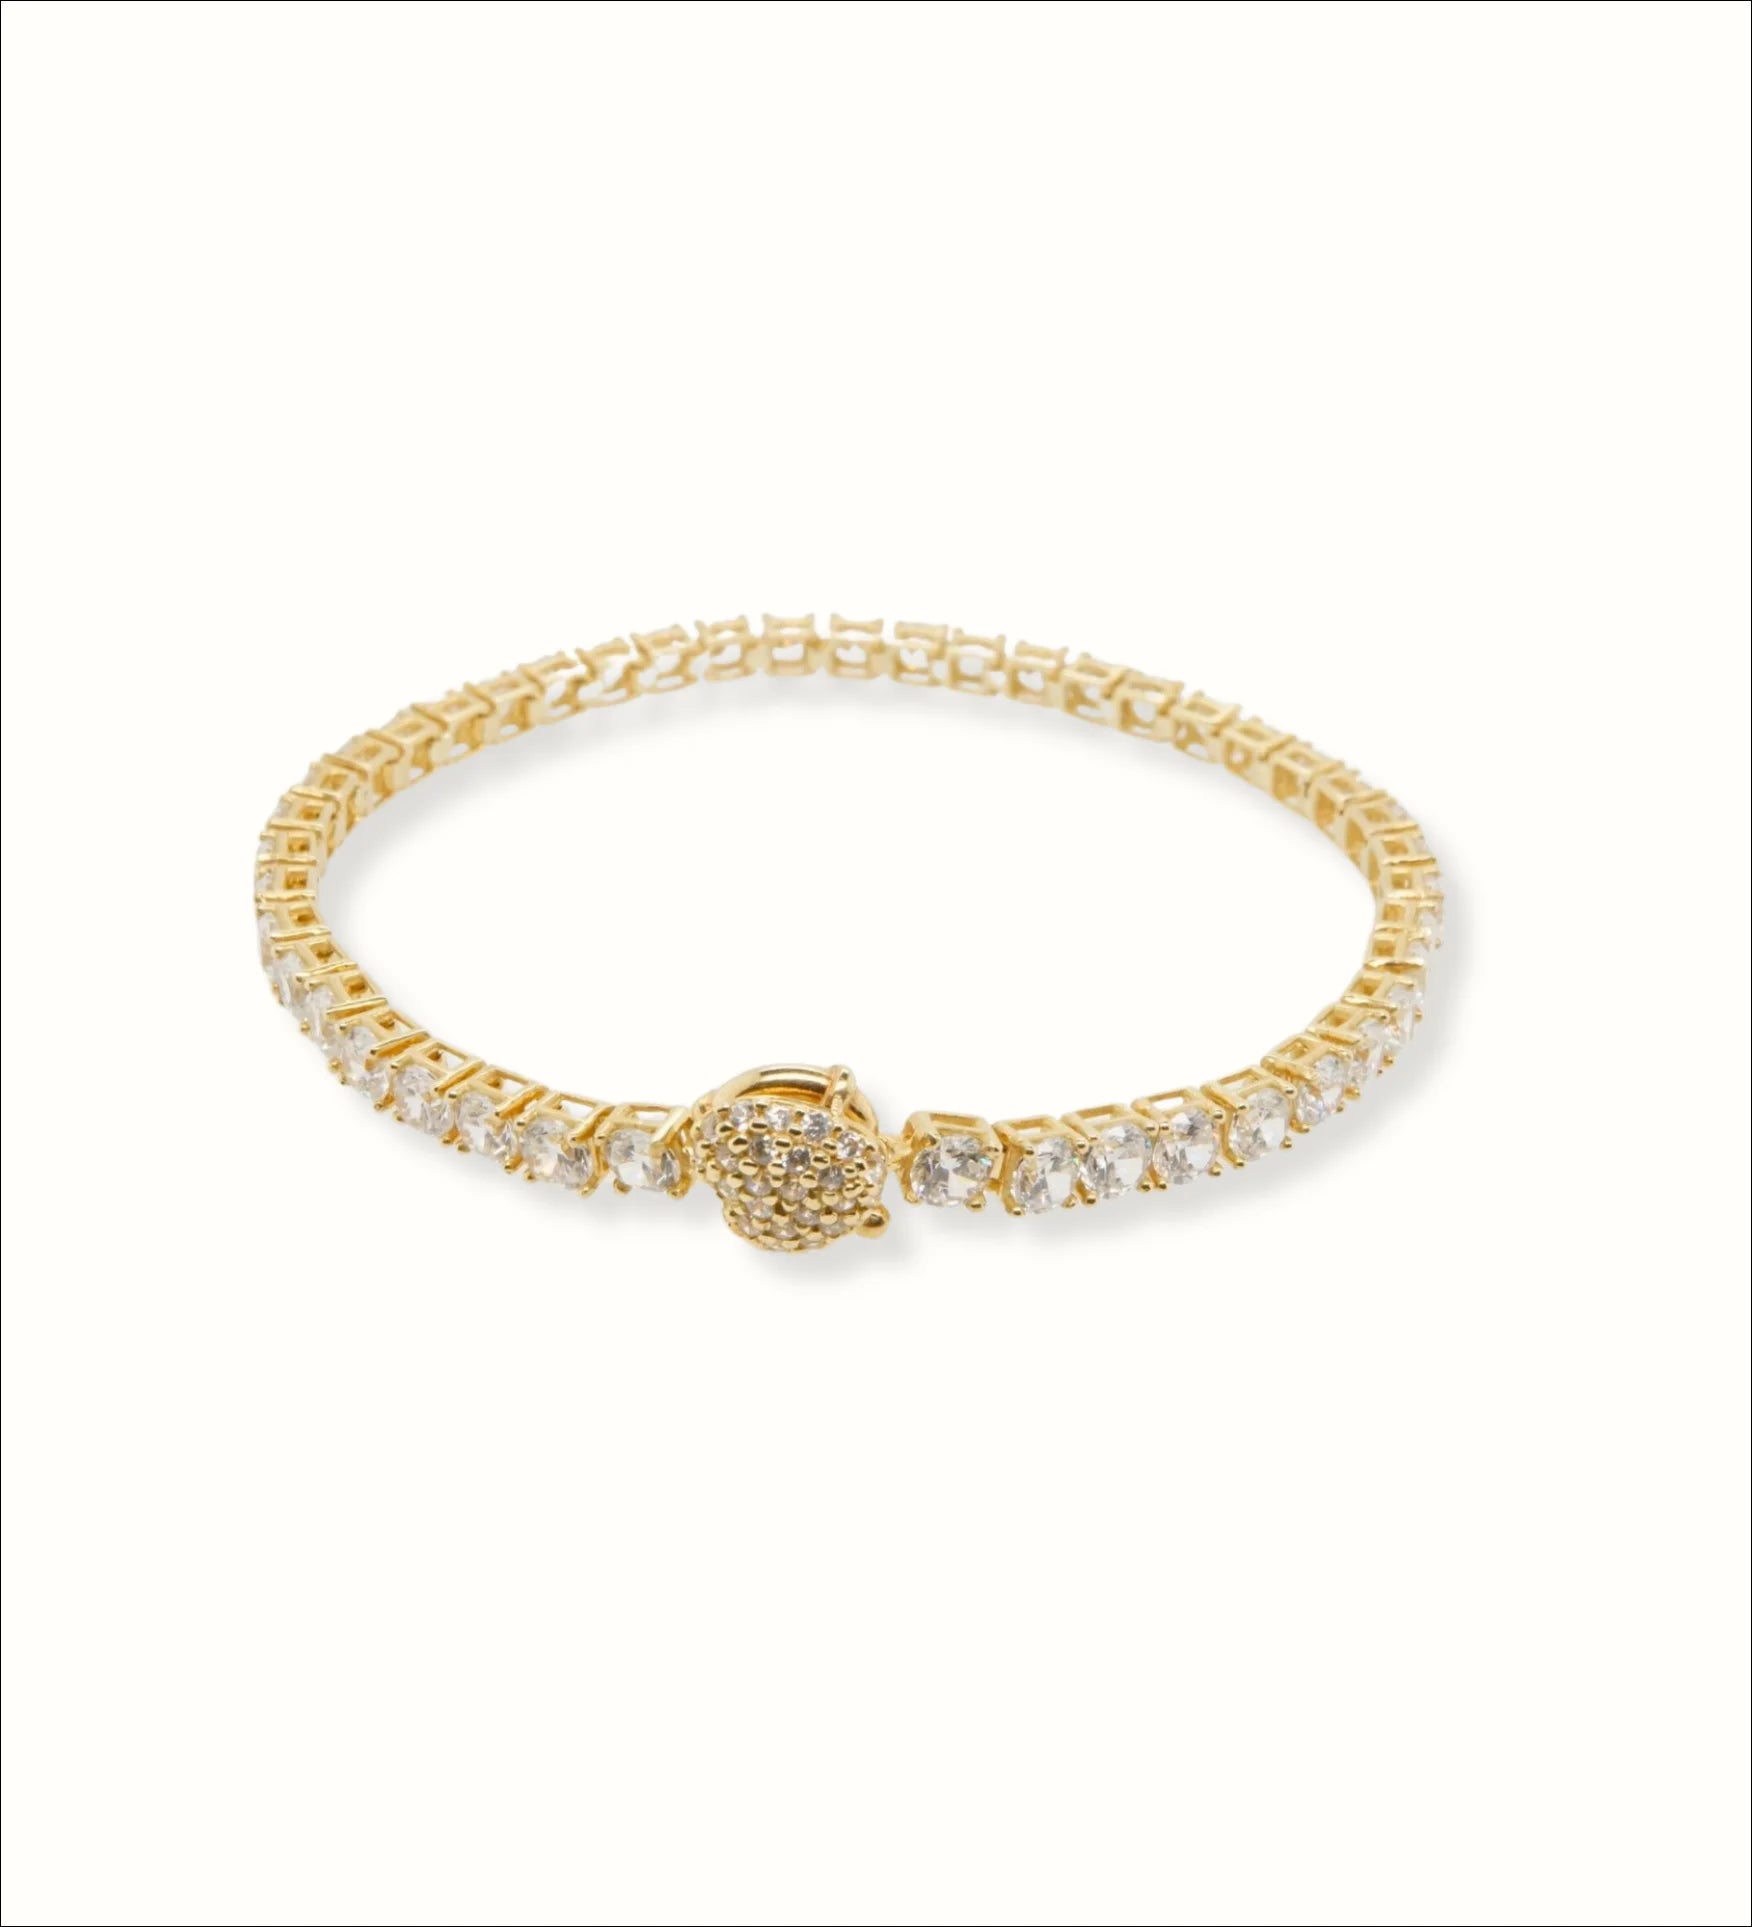 The 18k Tennis Bracelet Adorned with Zirconia | Home page